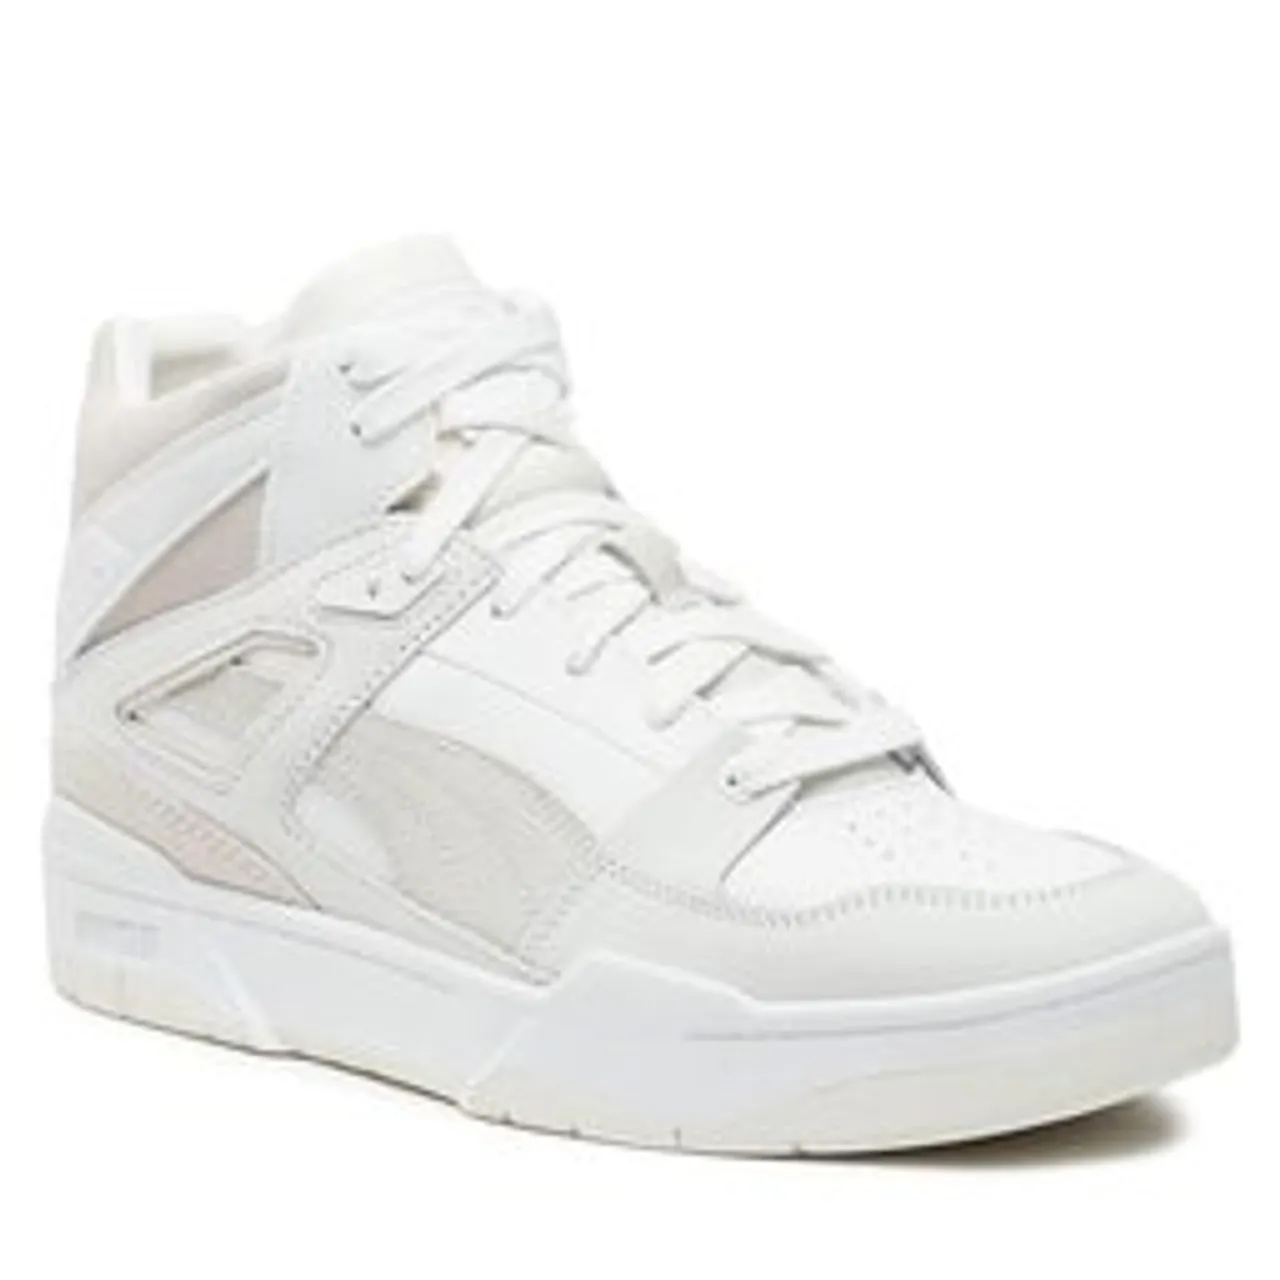 Sneakers Puma Slipstream Hi Lux II 393175 01 Puma White/Frosted Ivory